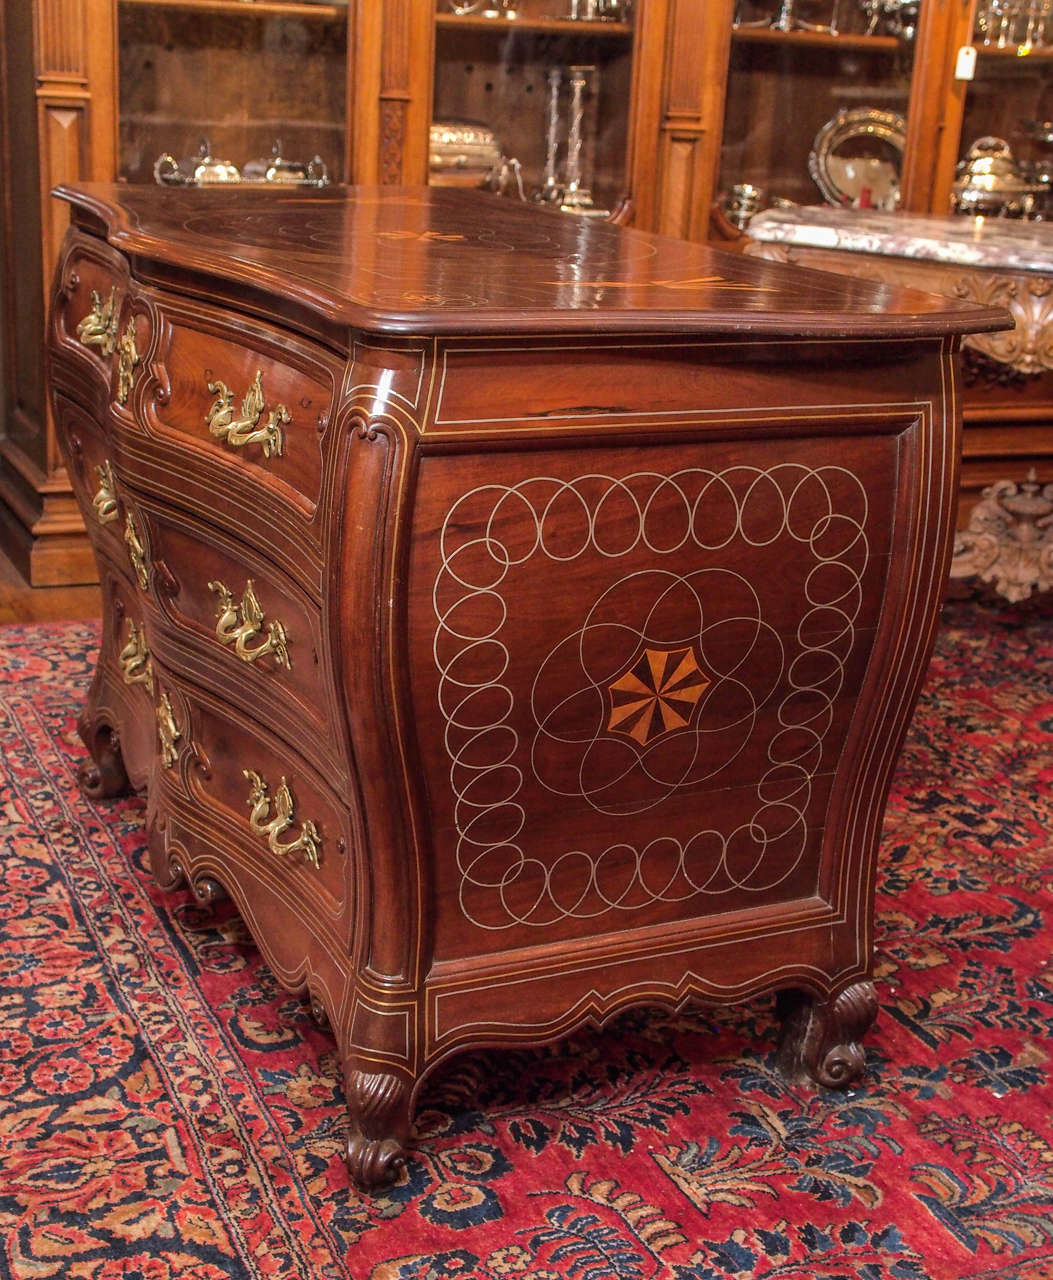 Antique French Provincial Walnut Bombe Chest with Metal Inlay, circa 1780-1810 For Sale 1